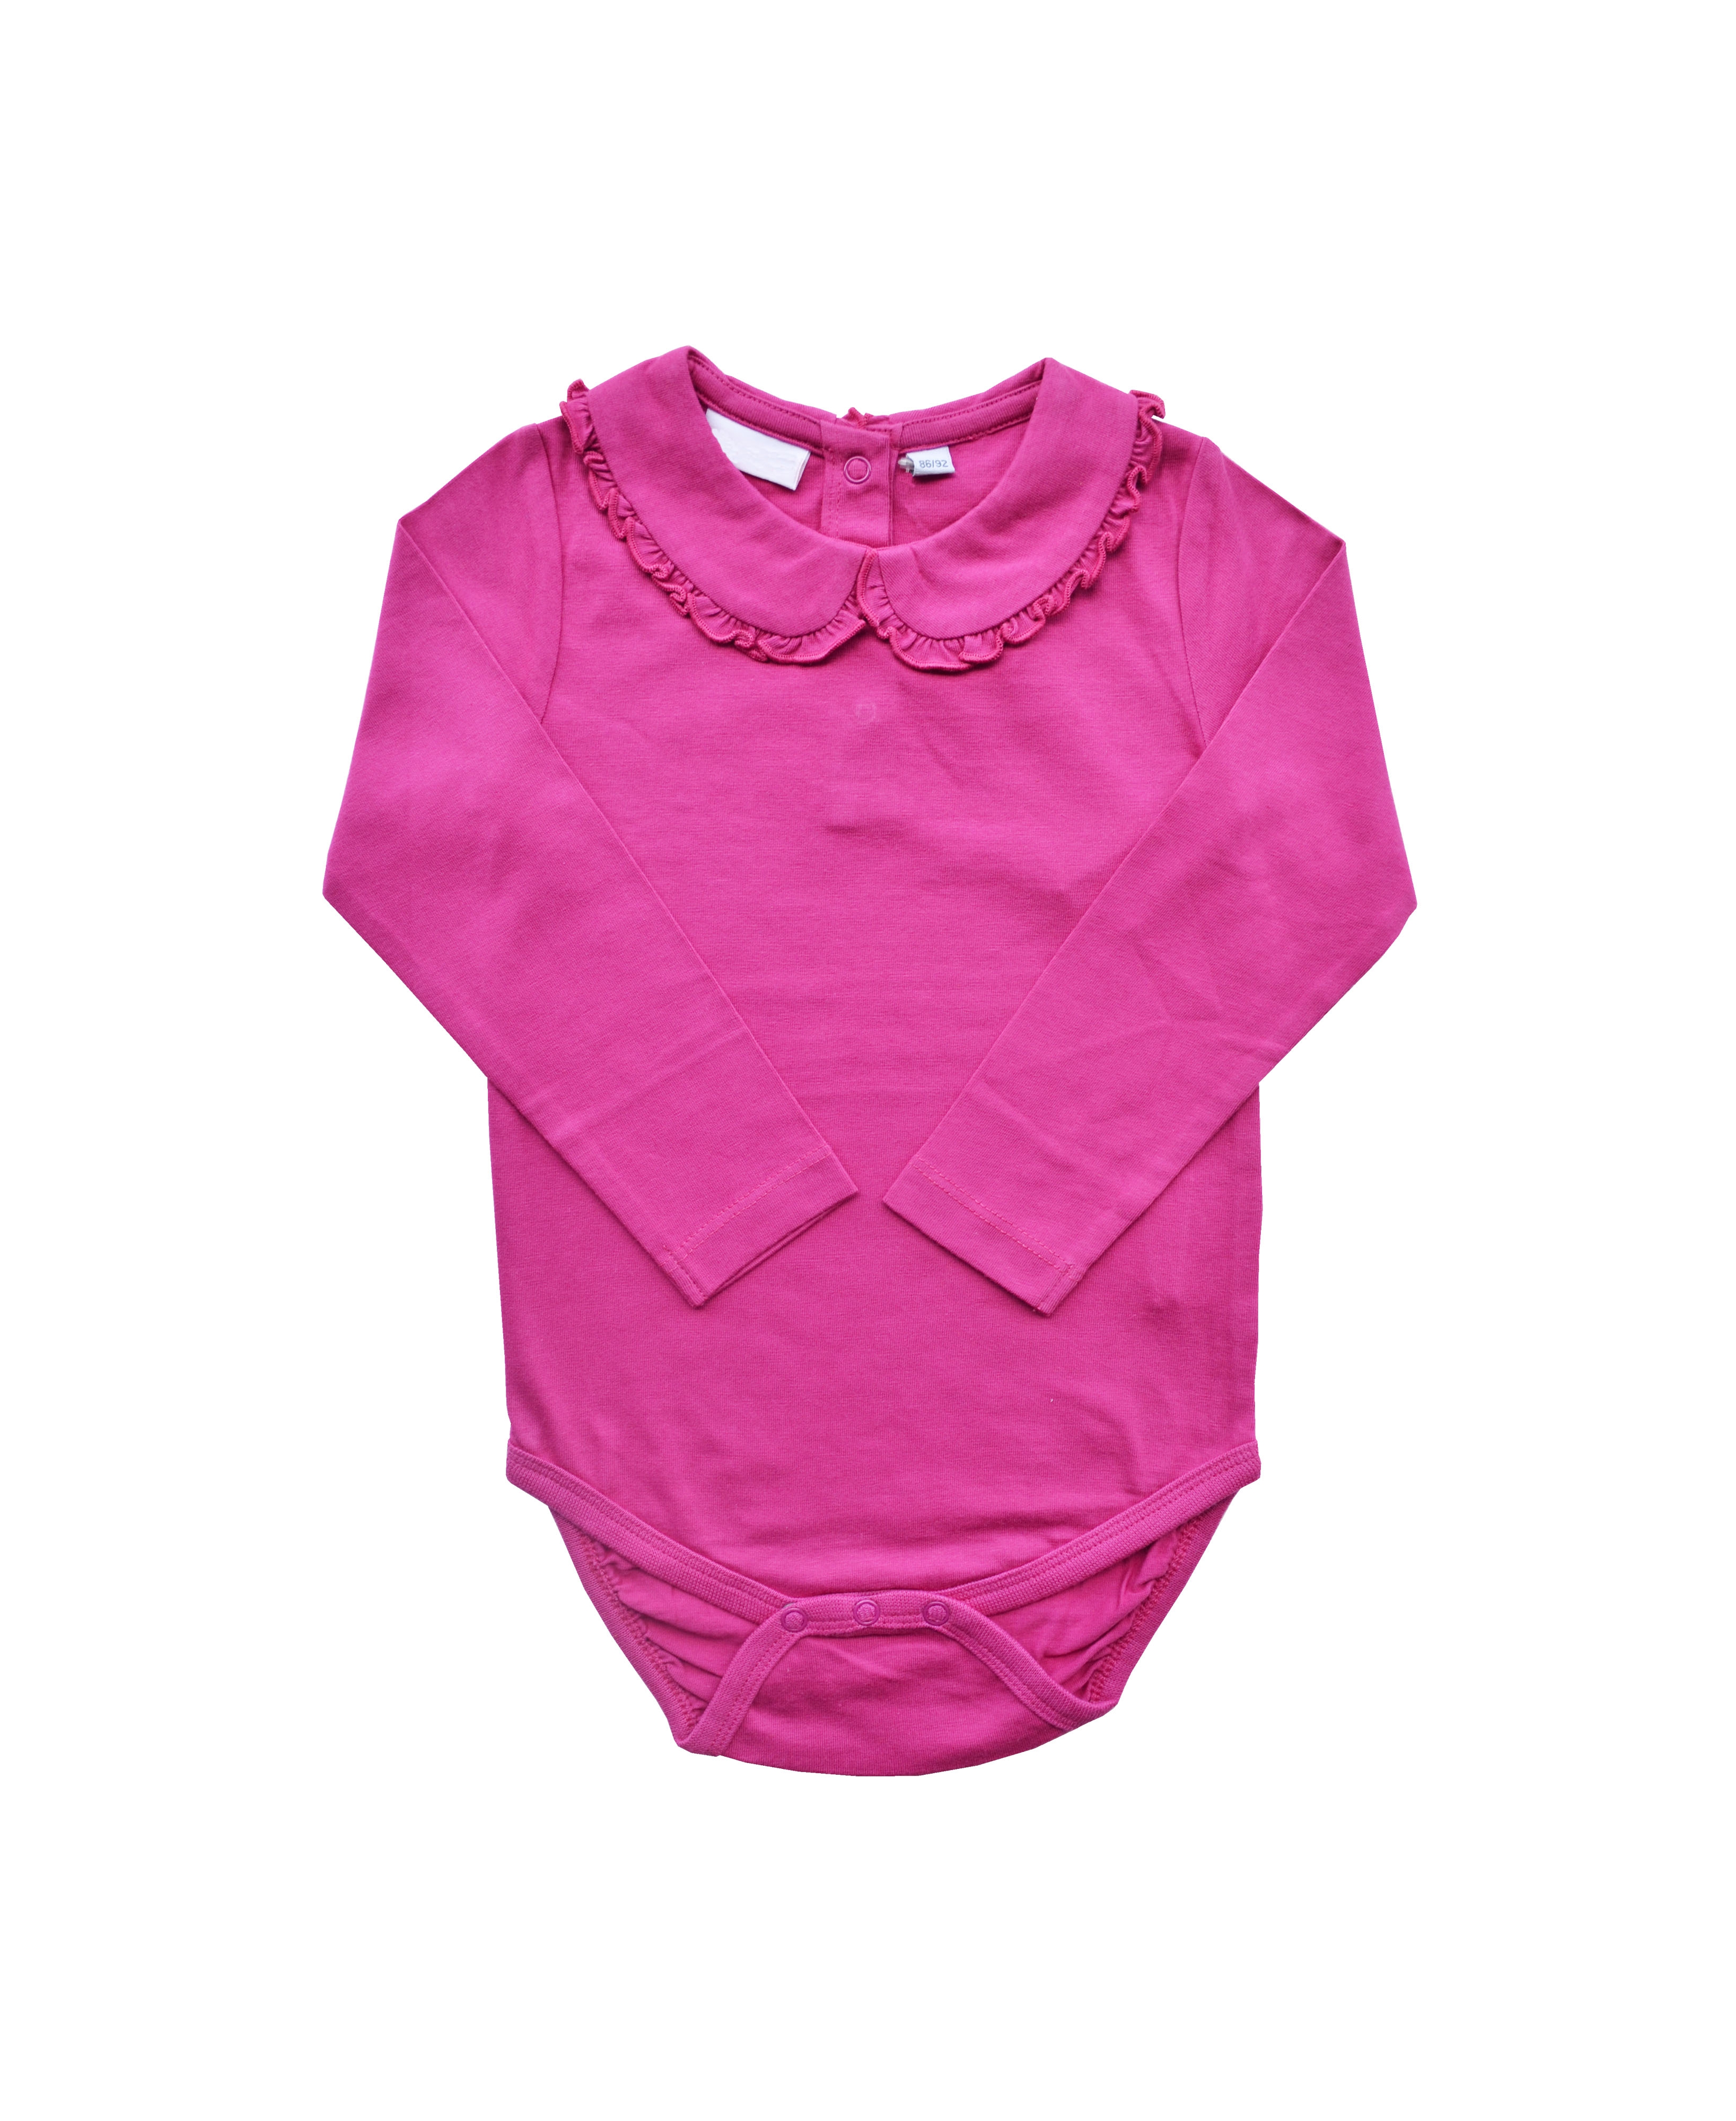 Babeez | Pink Body With Peter Pan Collar Opening On Back (100% Cotton Jersey) undefined